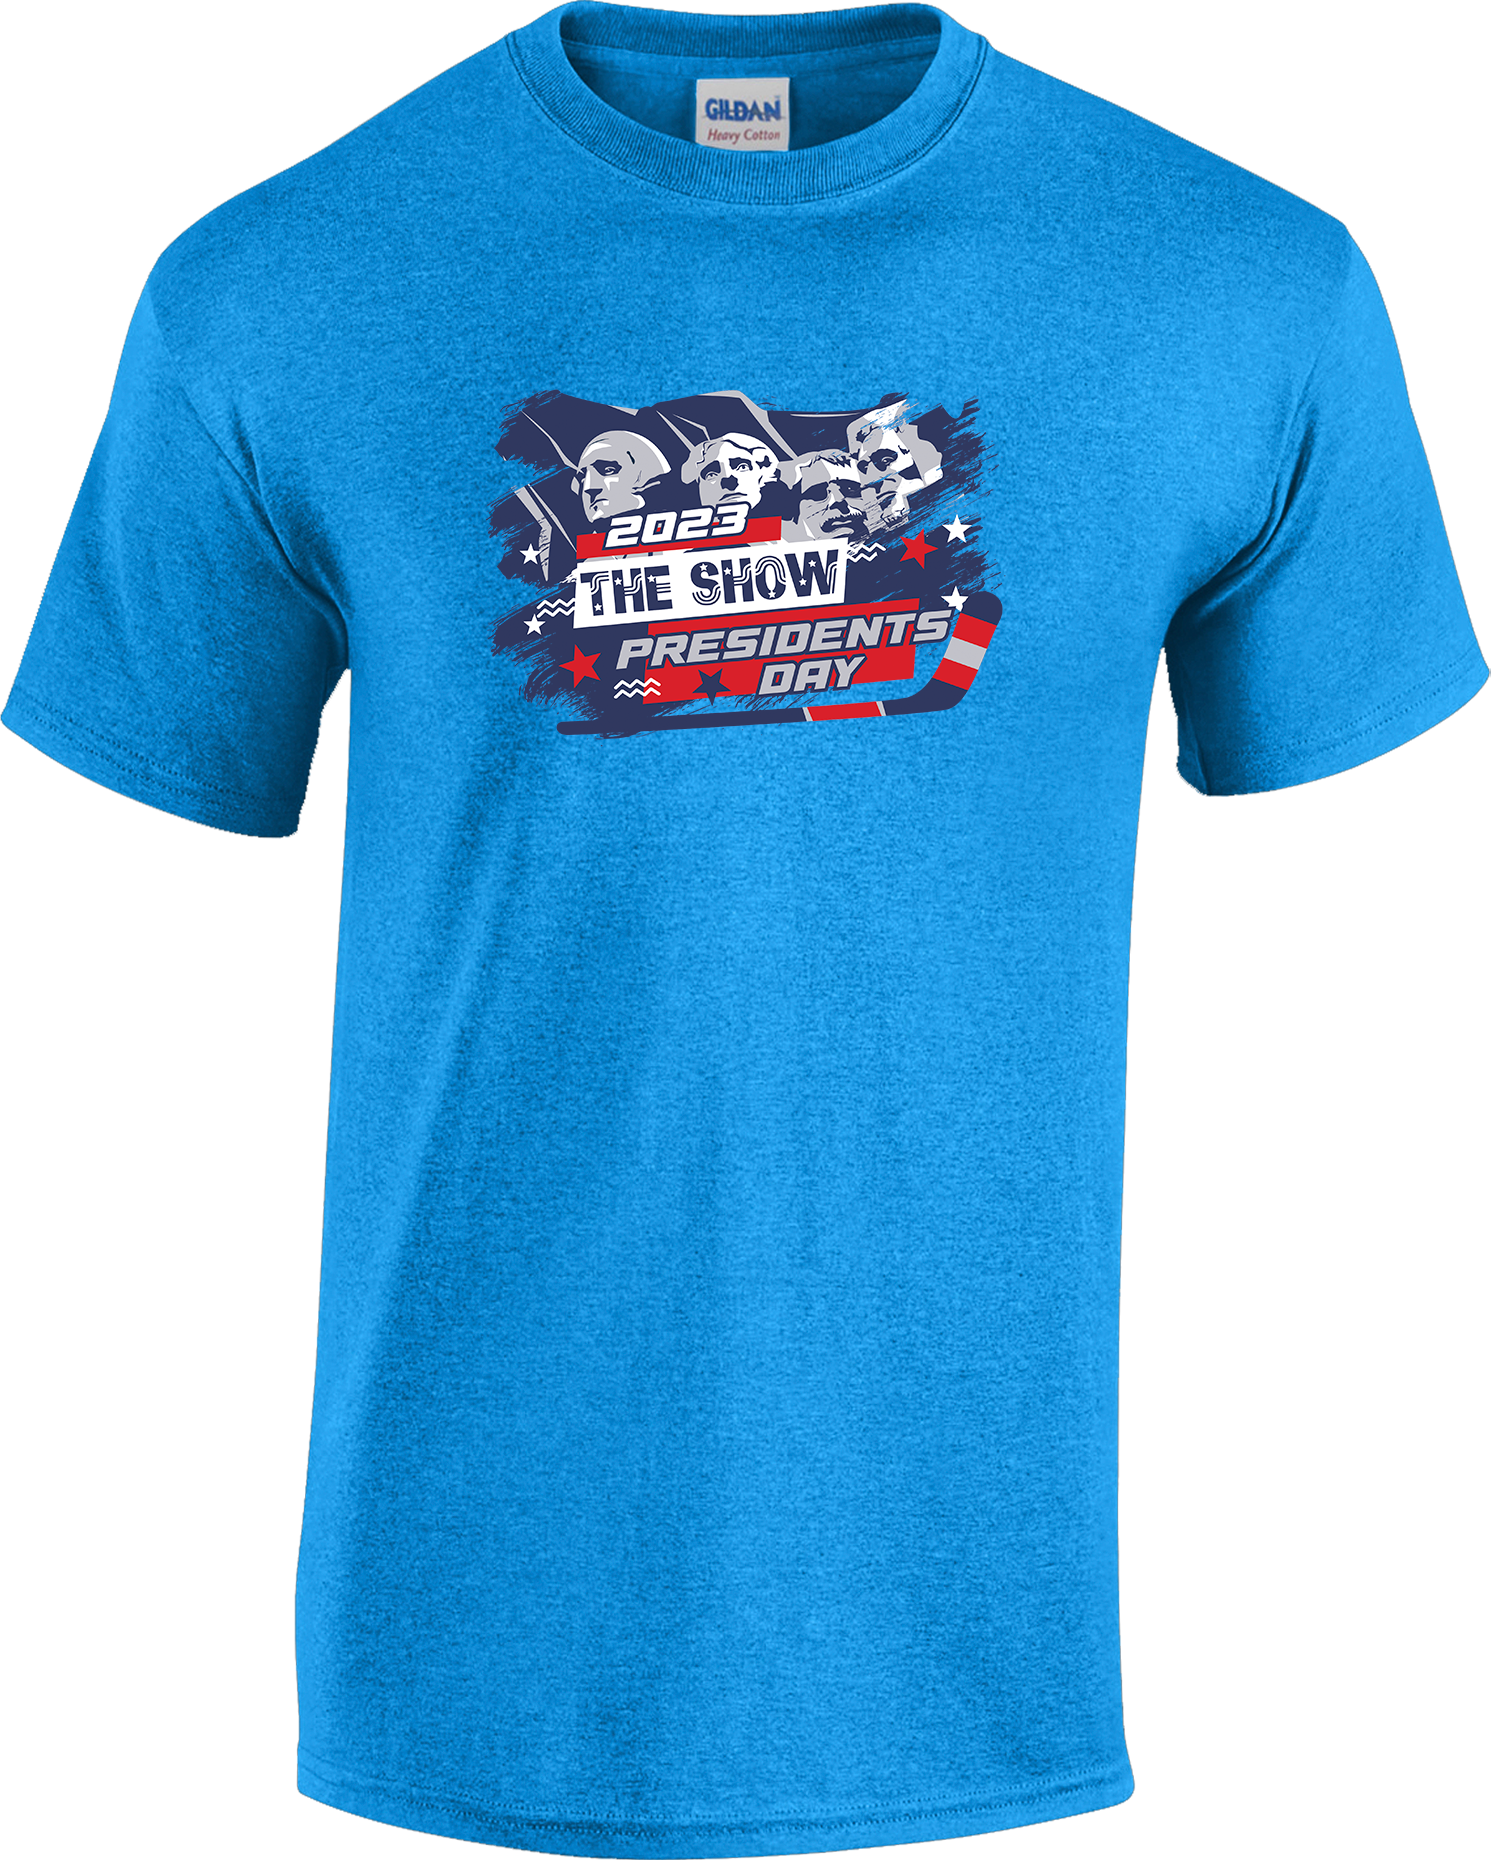 SHORT SLEEVES - 2023 The Show President's Day